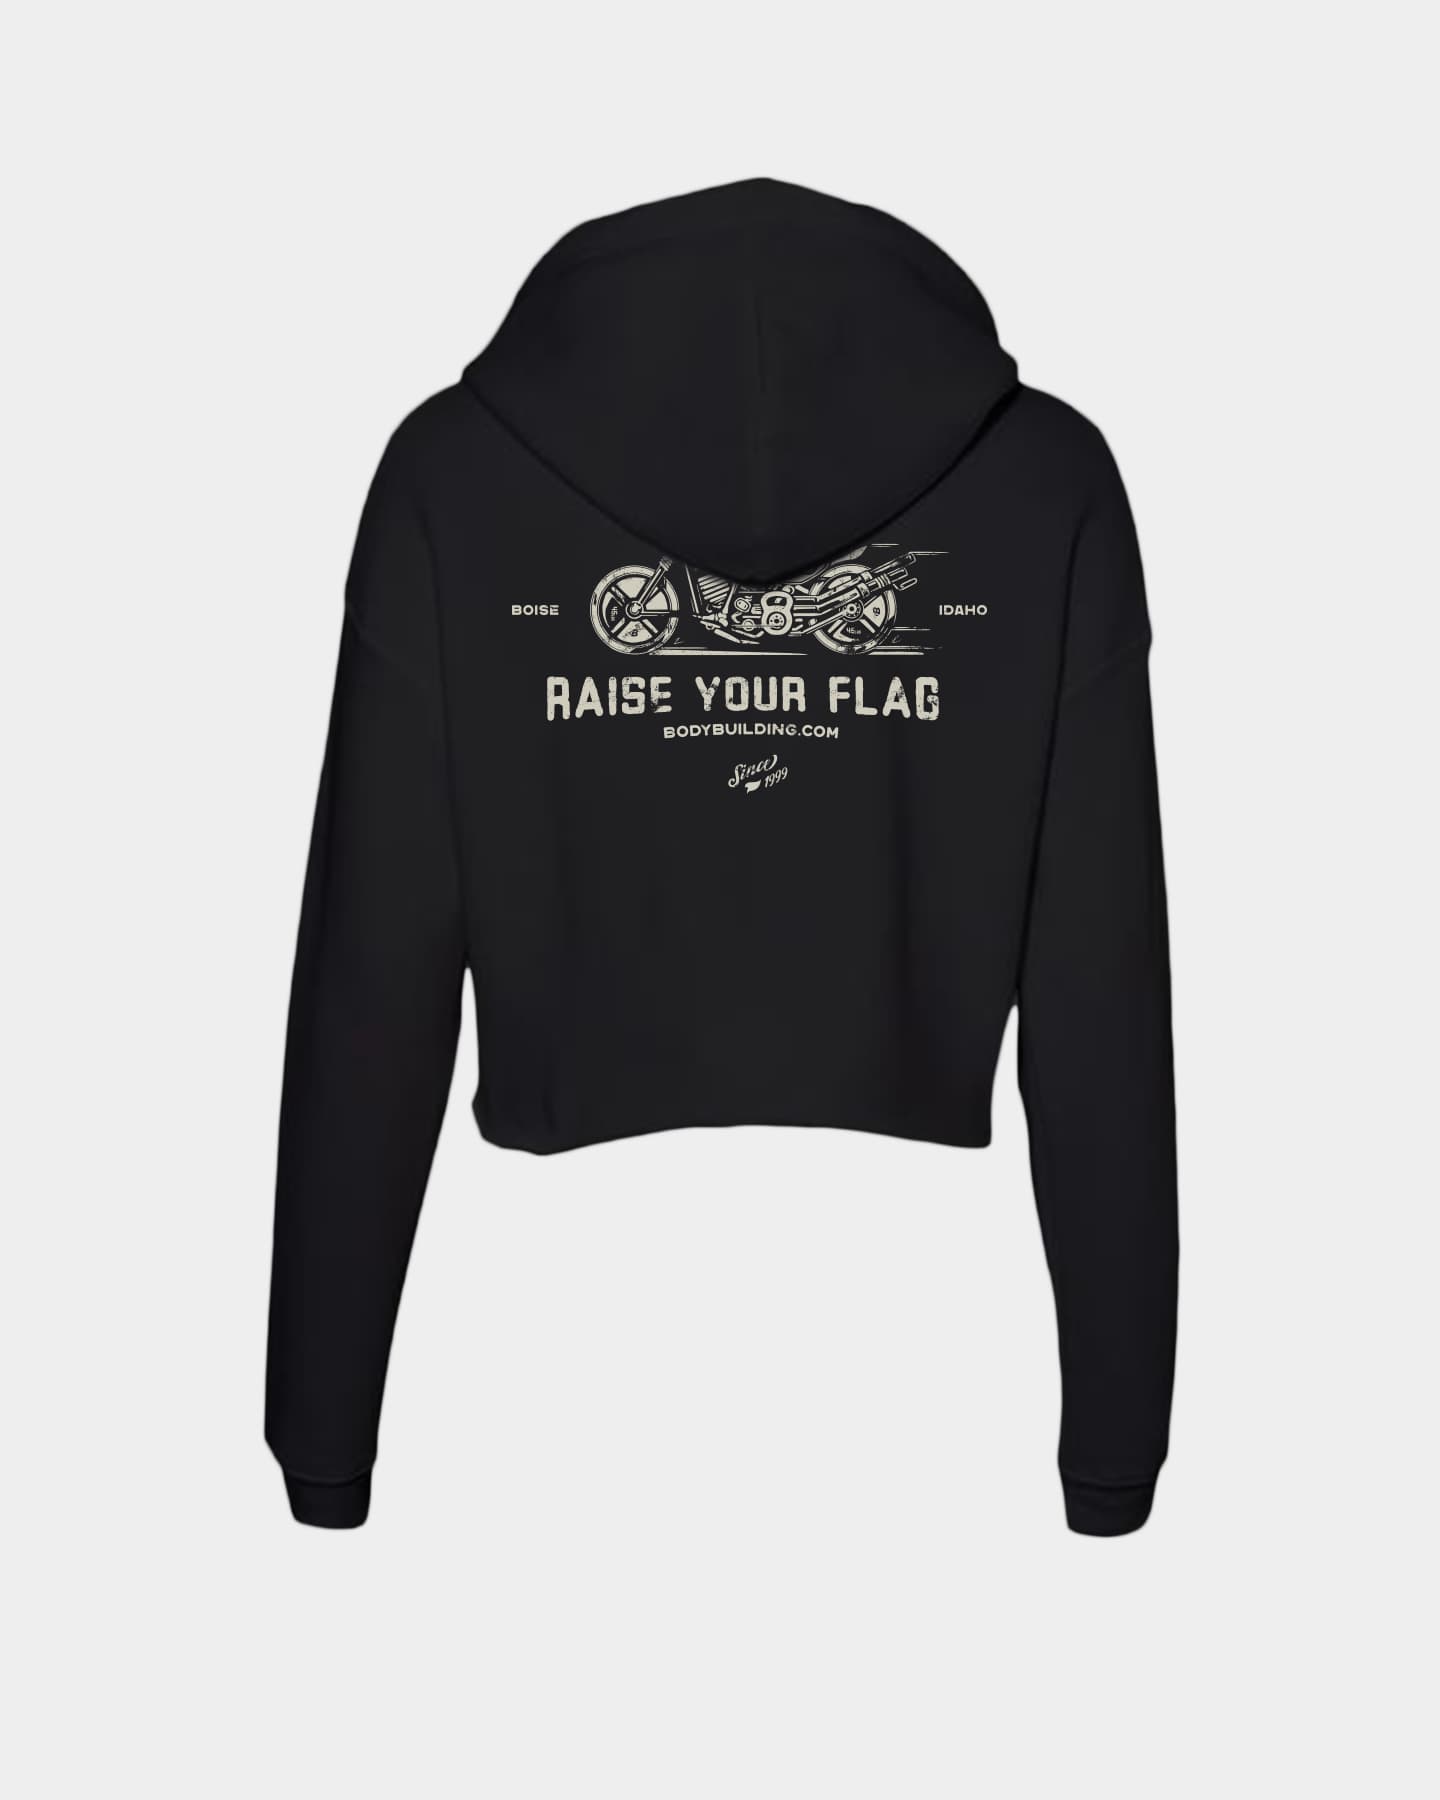 Bodybuilding.com Clothing Raise your Flag Cropped Long Sleeve Hoodie Tee